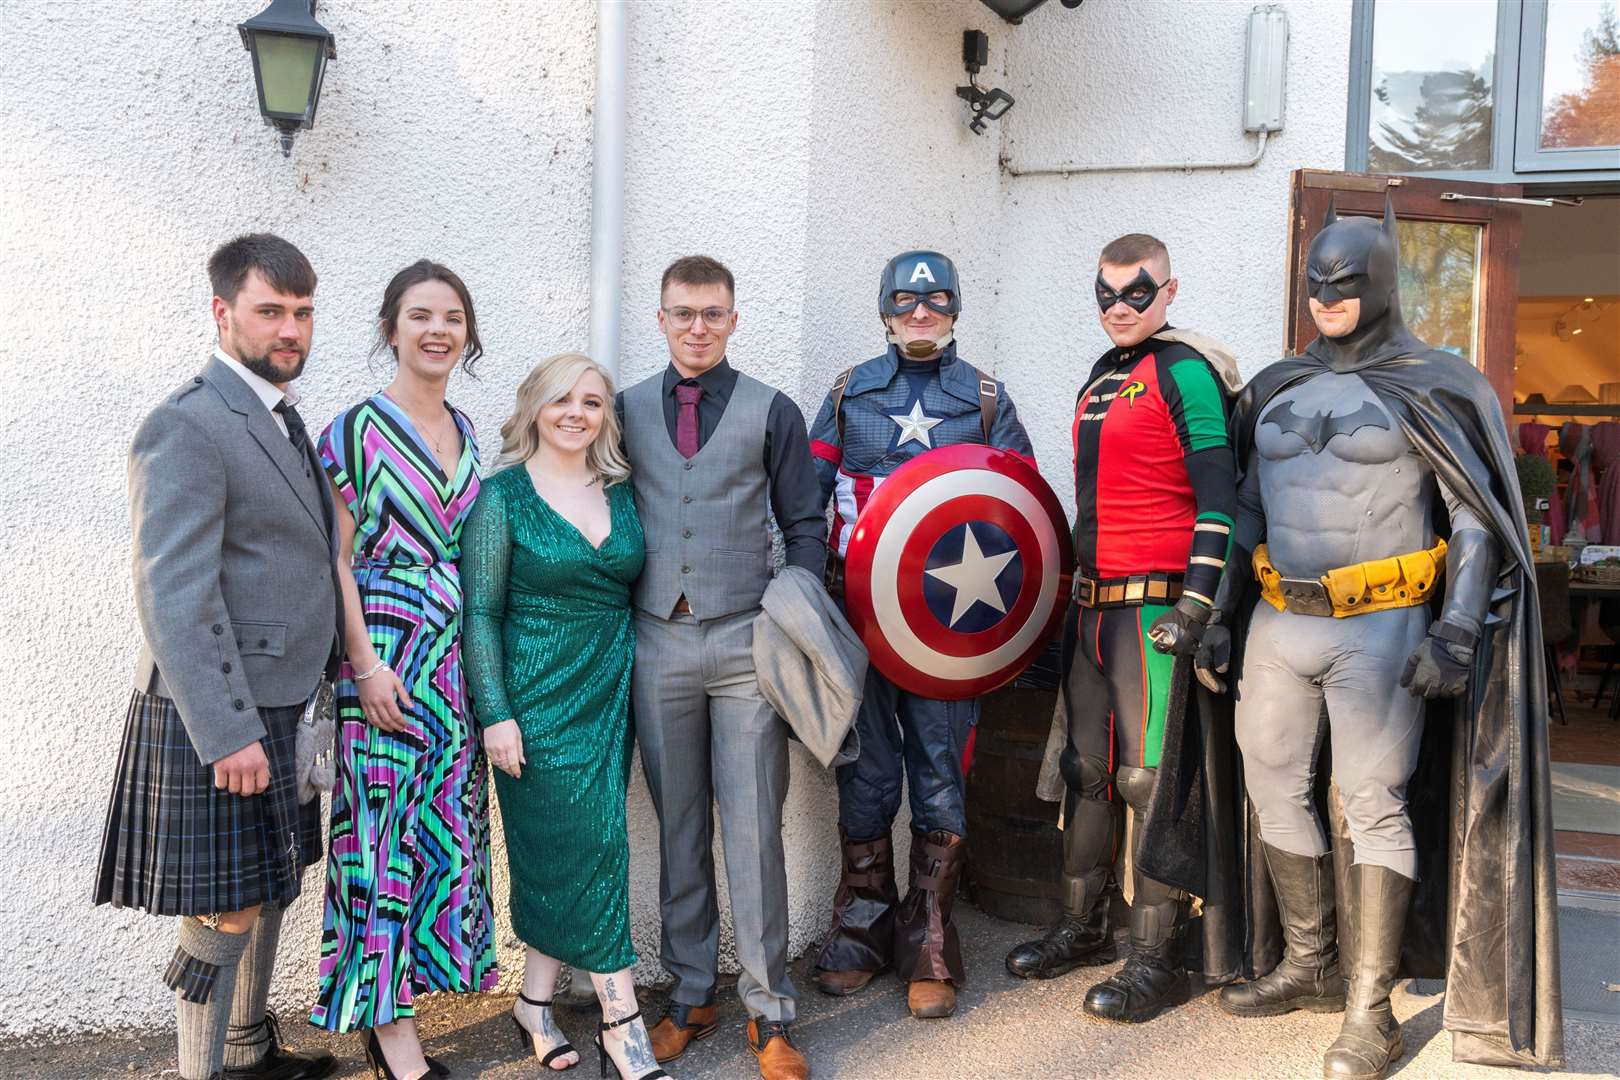 Everyone gets their glam on for the awards night – capes and utility belts are optional! Picture: Beth Taylor